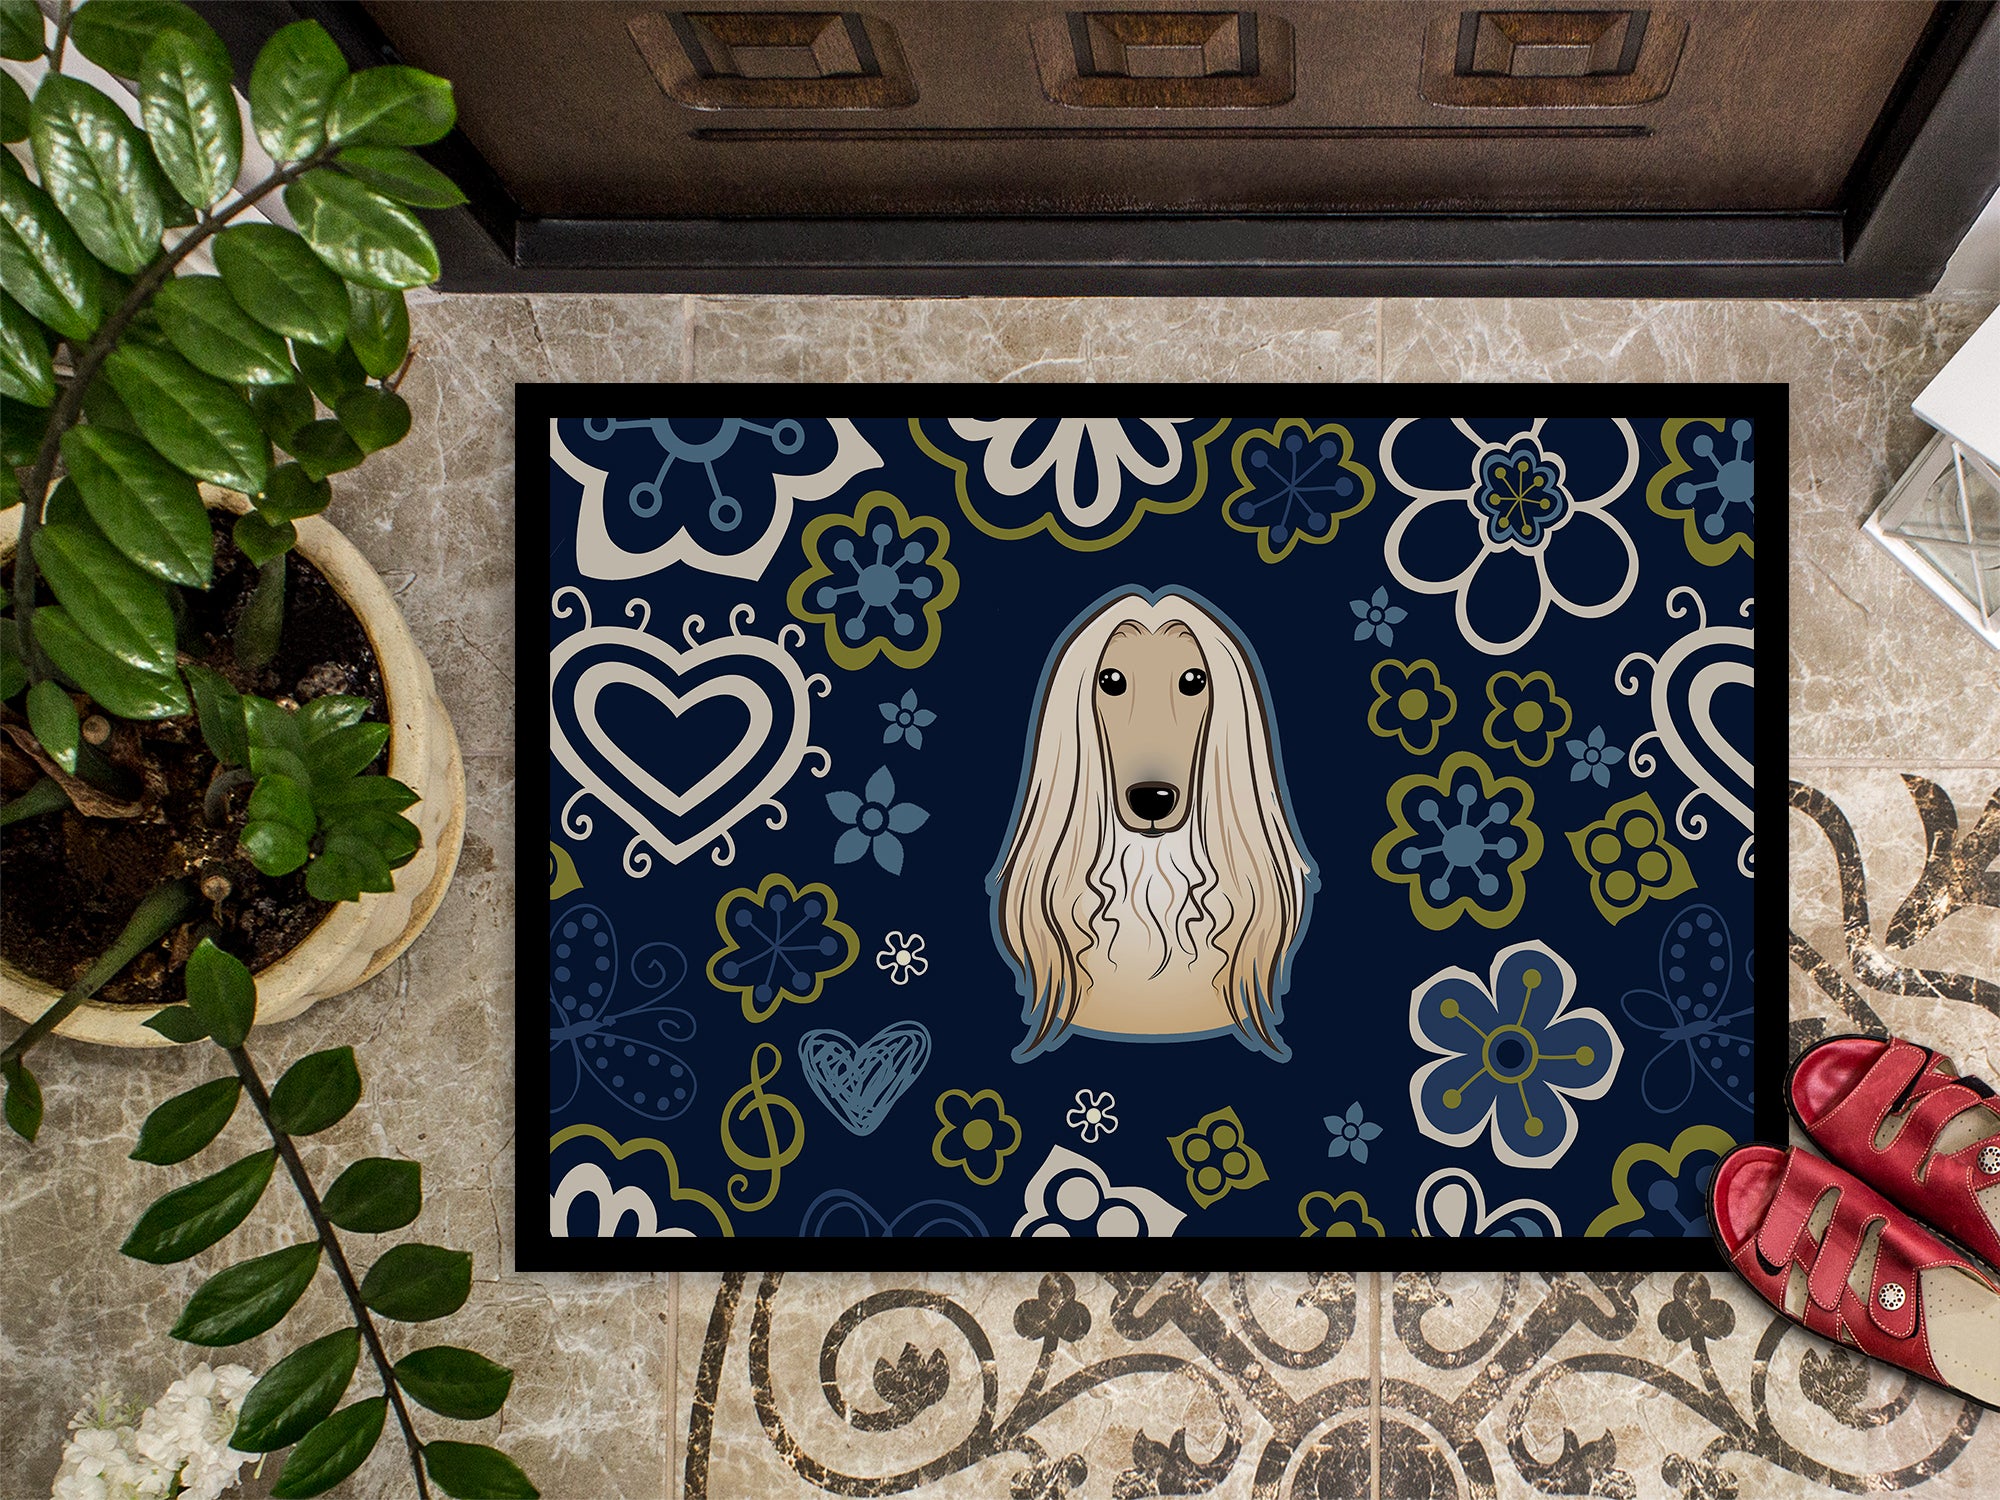 Blue Flowers Afghan Hound Indoor or Outdoor Mat 18x27 BB5095MAT - the-store.com